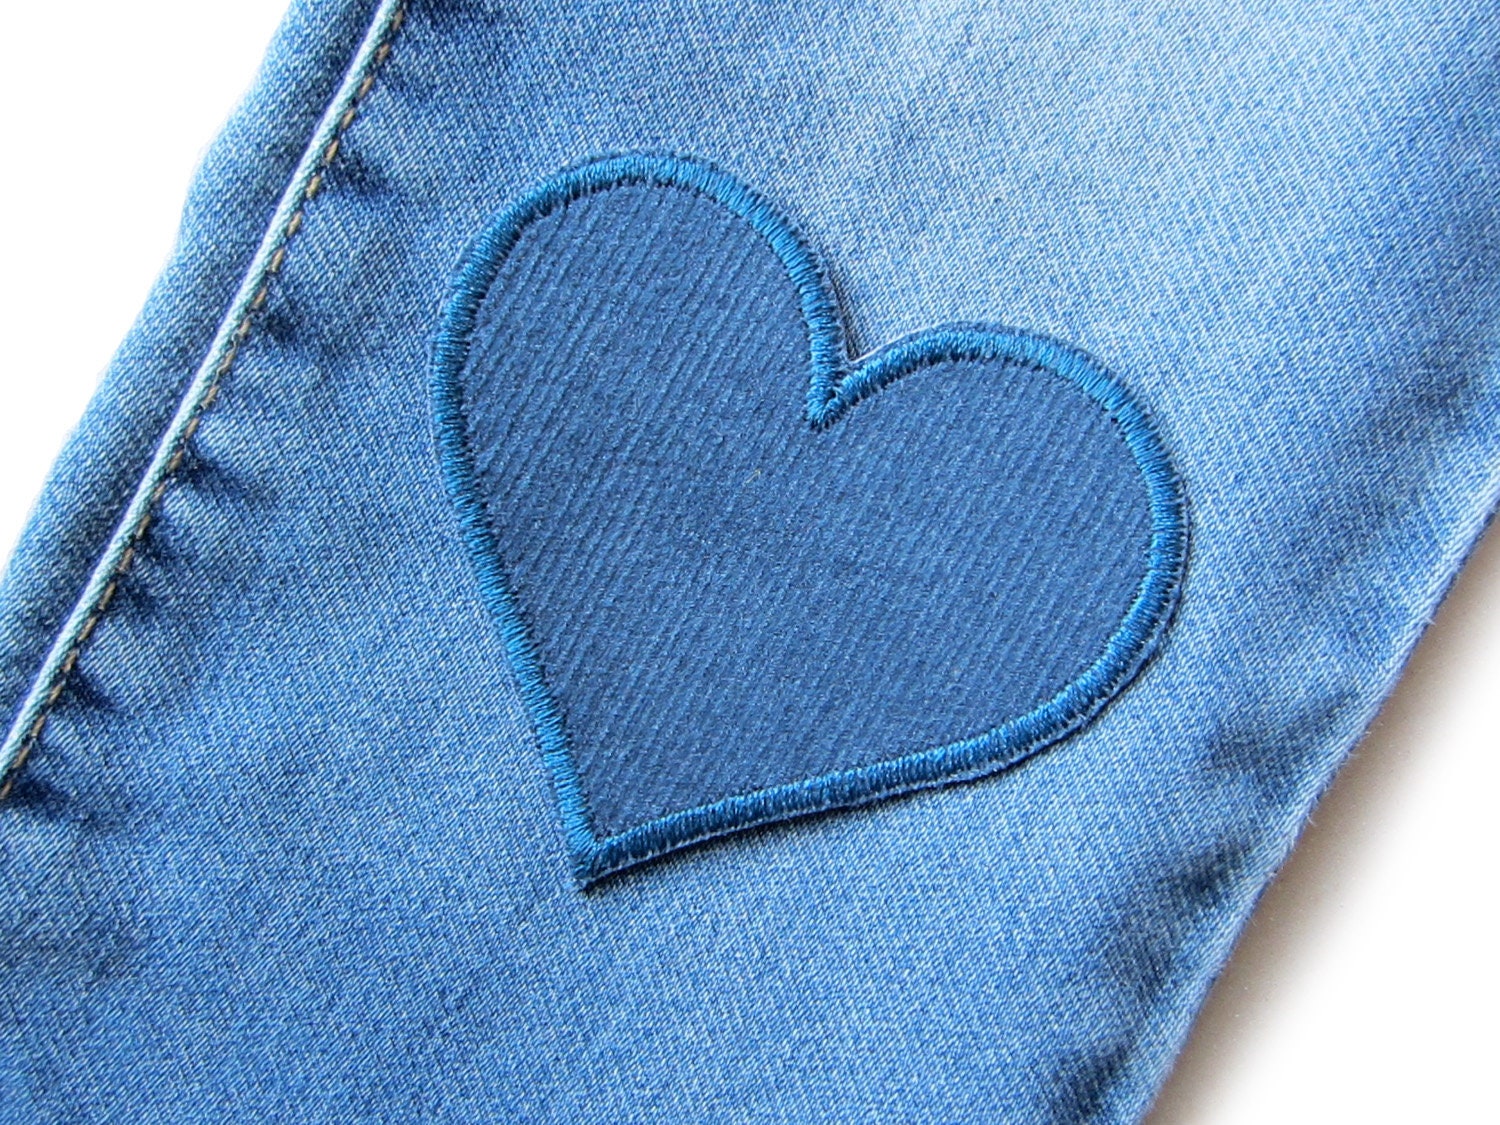 Set of 2 Corduroy Patches Heart Red, 8.5 X 8 Cm, Heart Patches for Corduroy  Trousers, Ironing Pictures for Children 